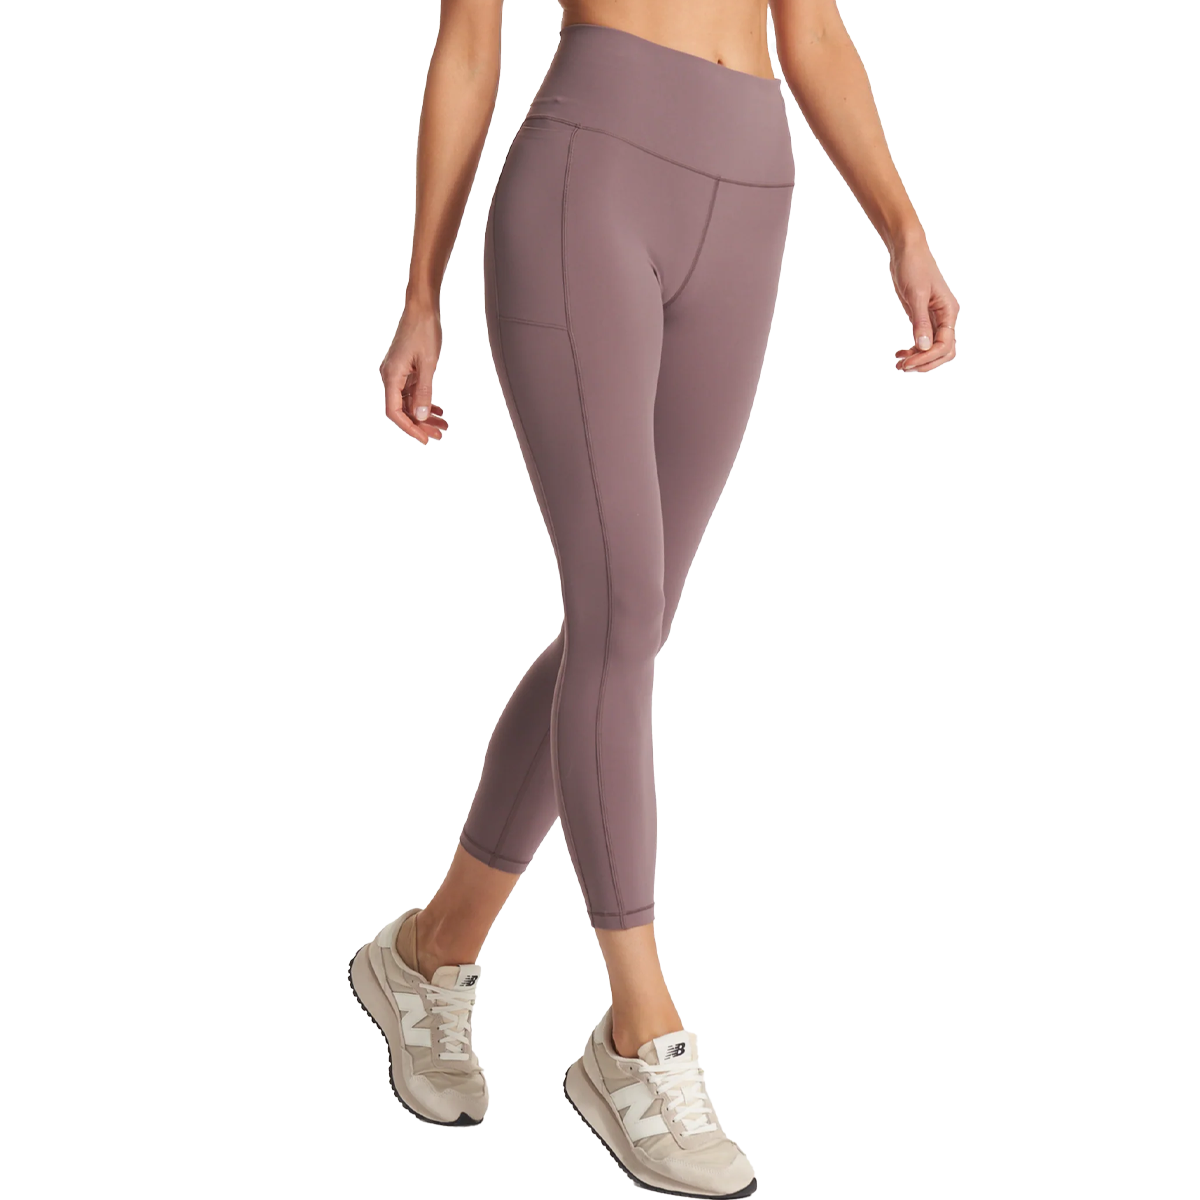 Women's Synthetic Latex Slim Fit Leggings Stretchy Low Waist